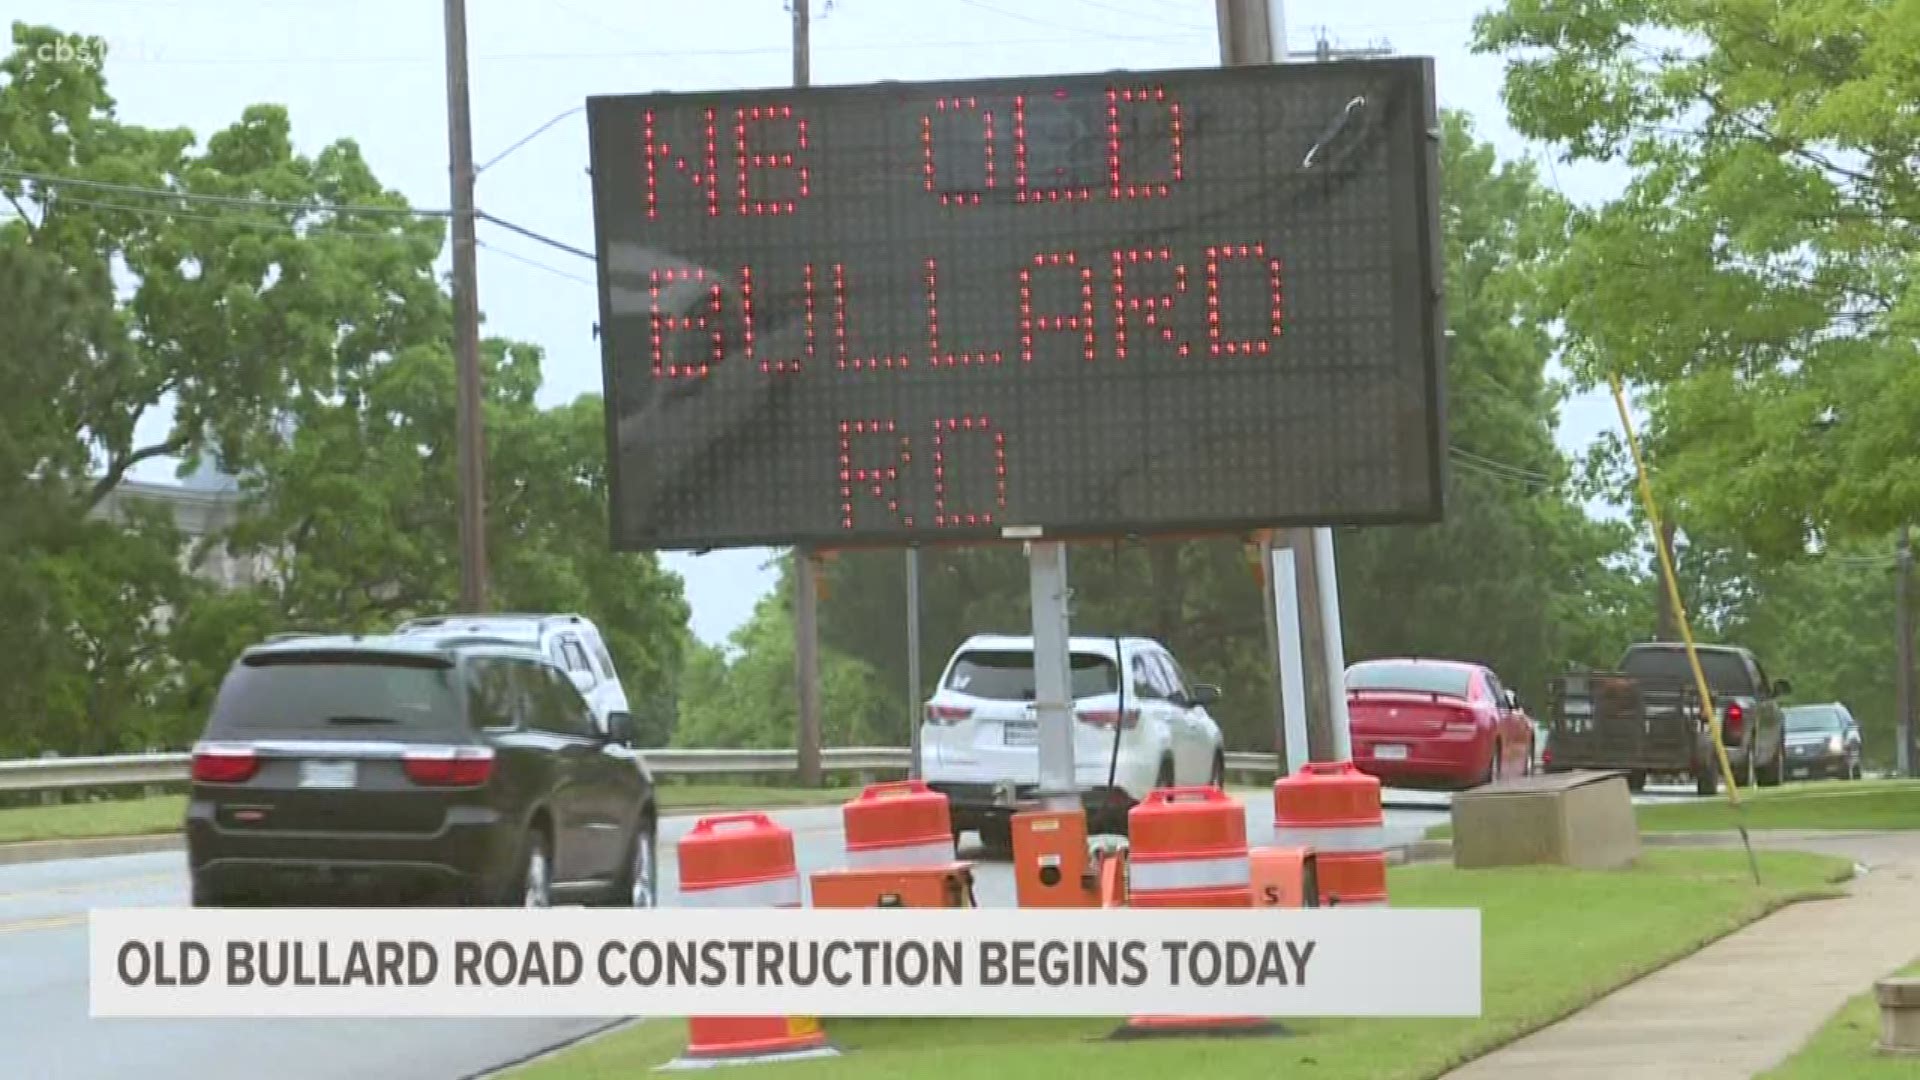 Starting today, the City of Tyler will begin construction on Old Bullard Road near Broadway Square Mall. 
Construction is expected to take four months, ending around August.